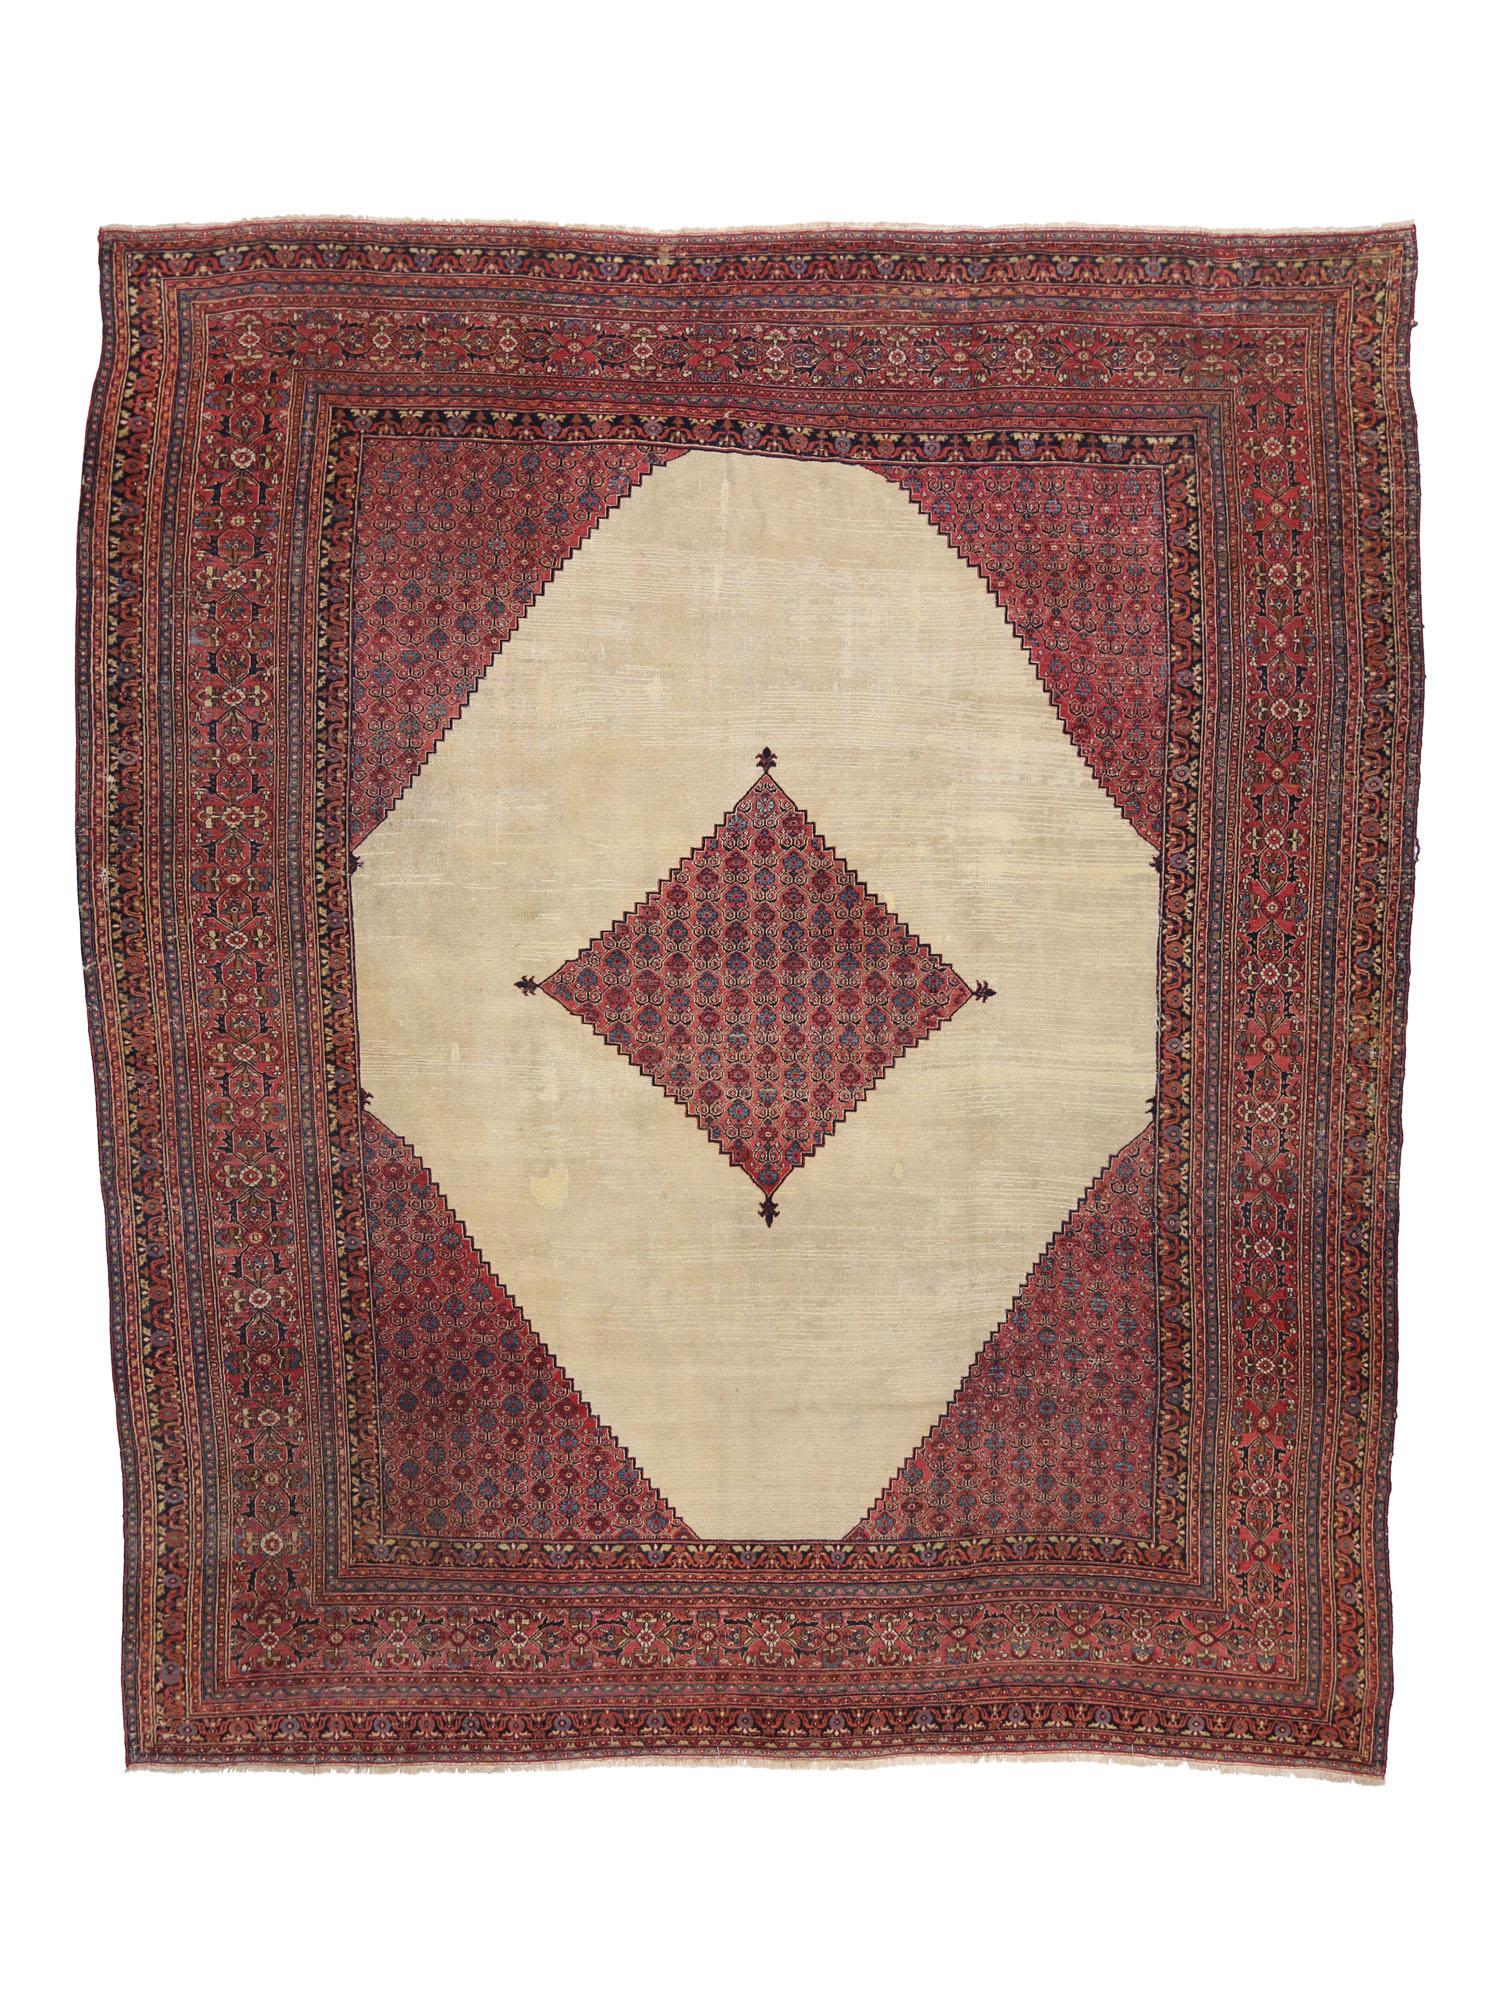 Hand-Knotted Oversized Antique Persian Khorassan Rug, Hotel Lobby Size Carpet For Sale